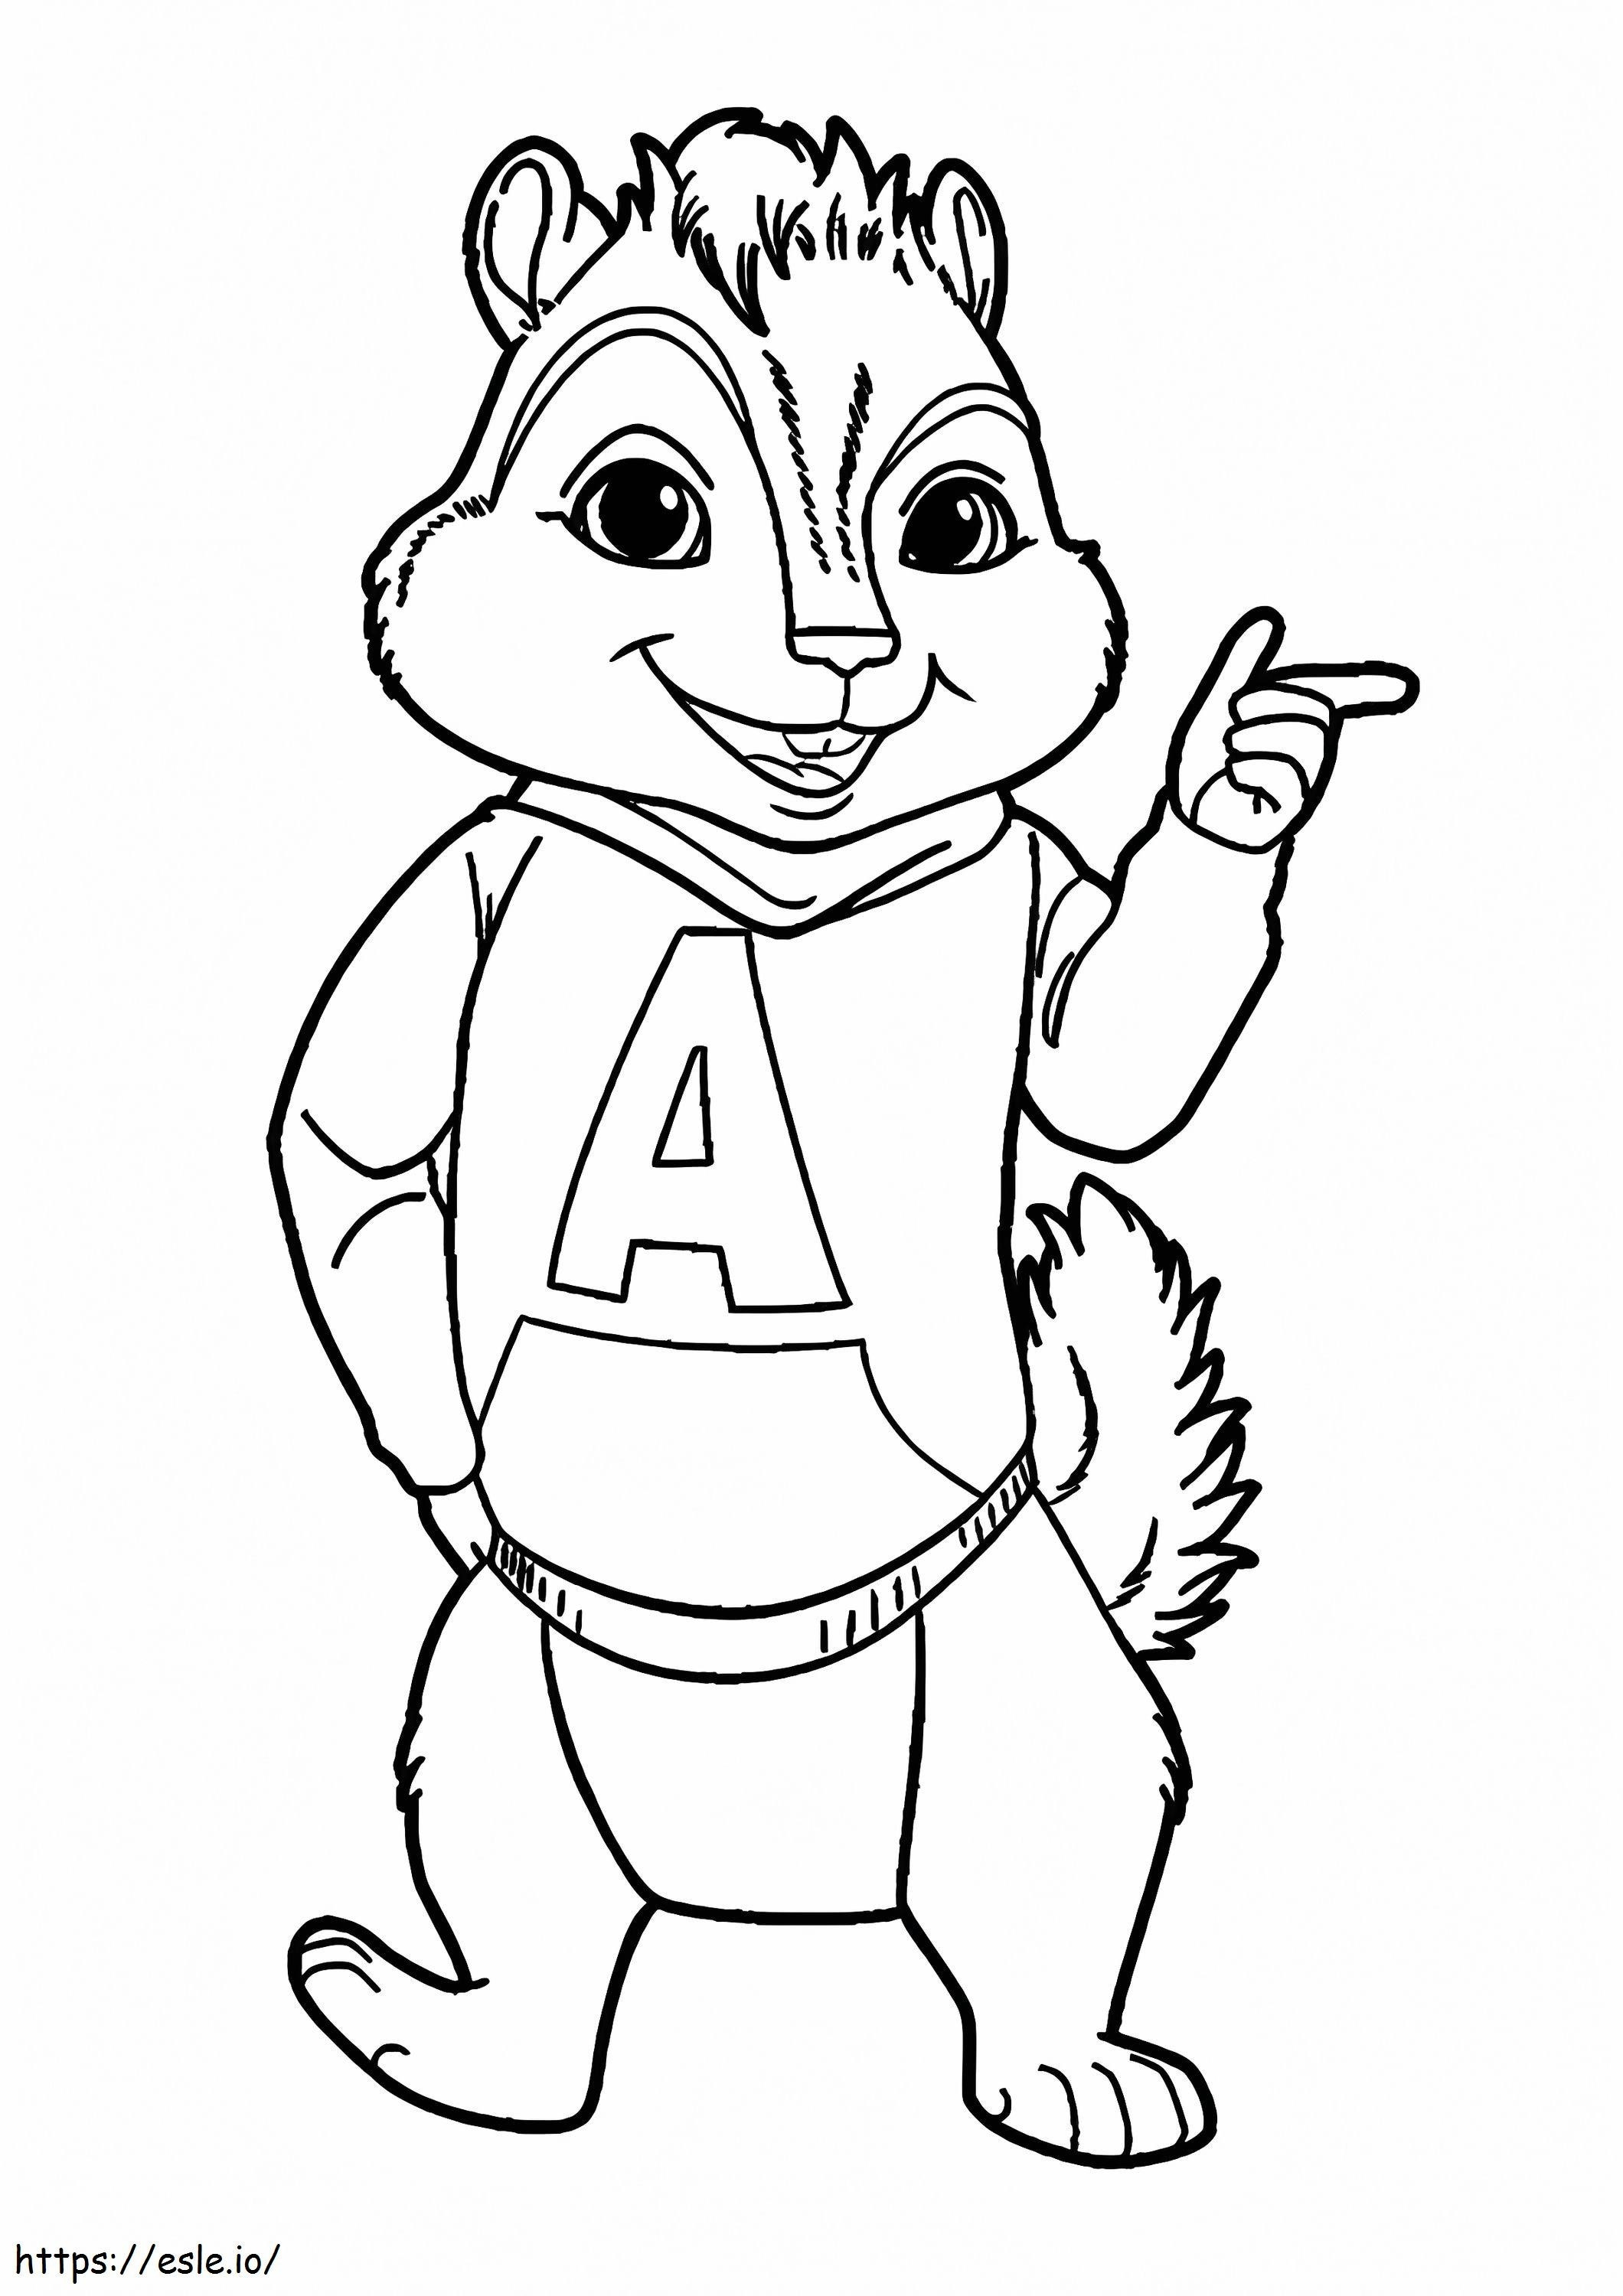 Cool Alvin In Alvin And The Chipmunk A4 coloring page